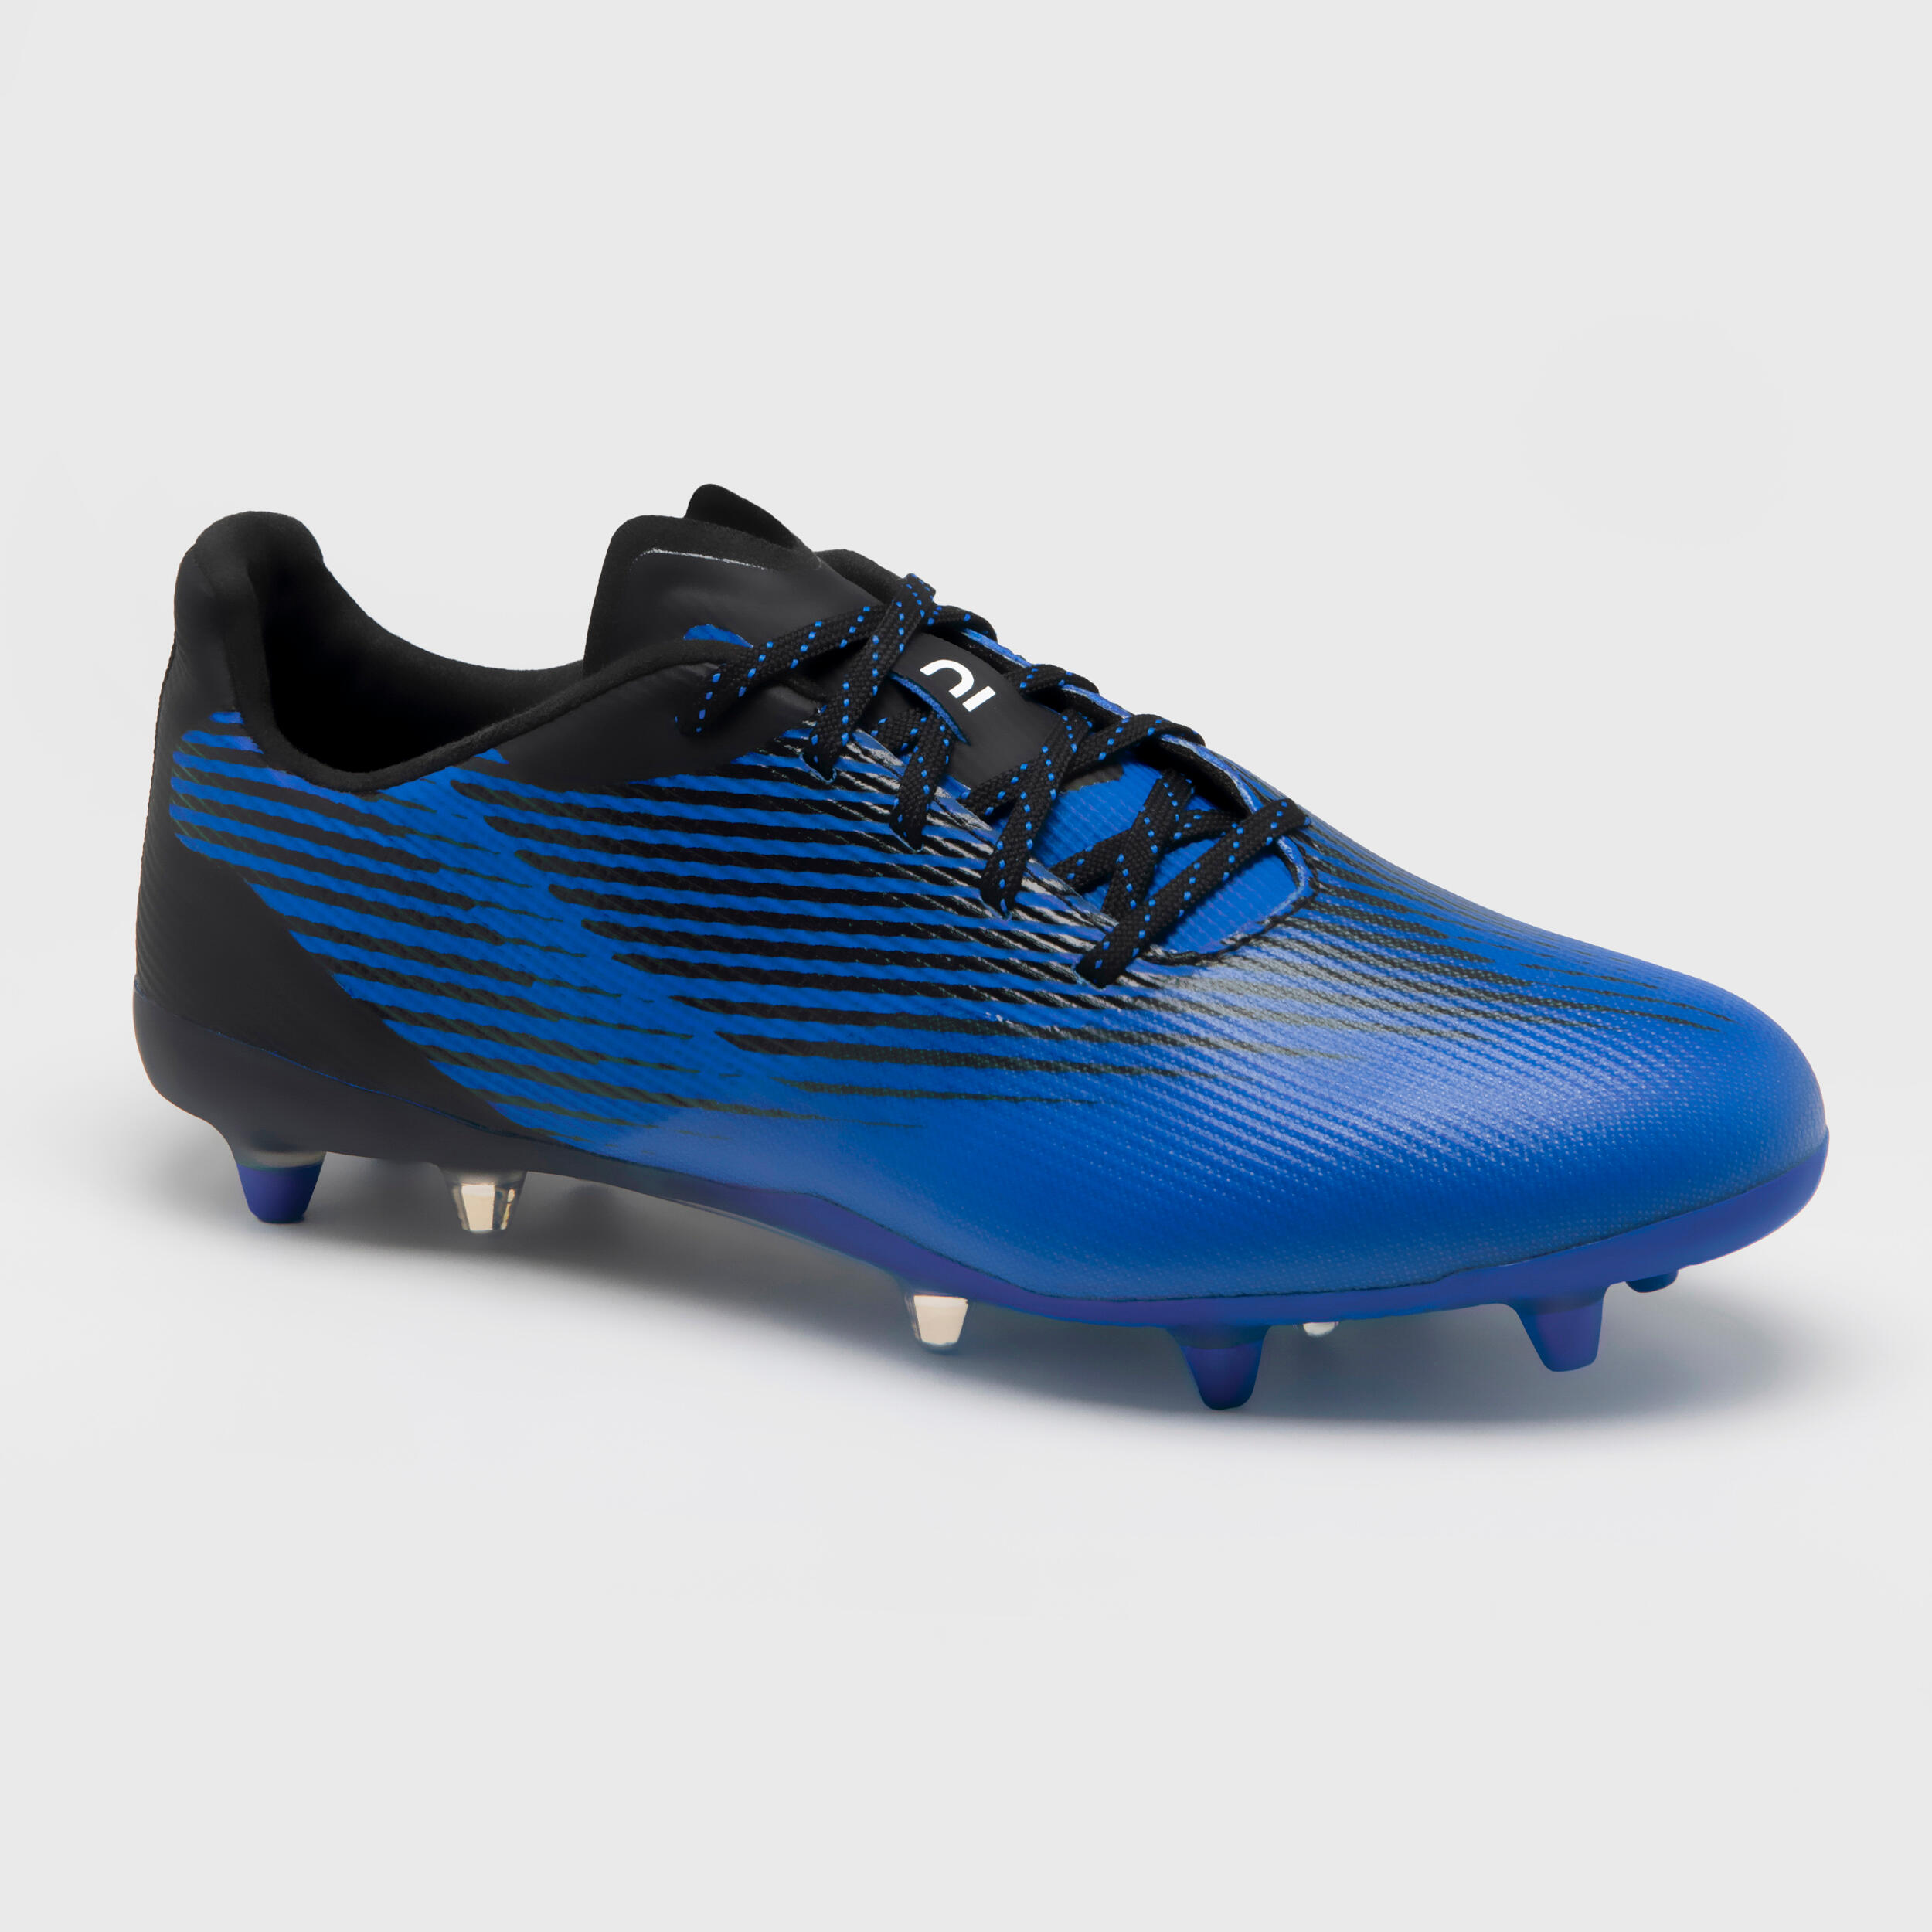 Offload Men's/women's Dry Pitch Moulded Rugby Boots Score R500 Fg - Blue/black